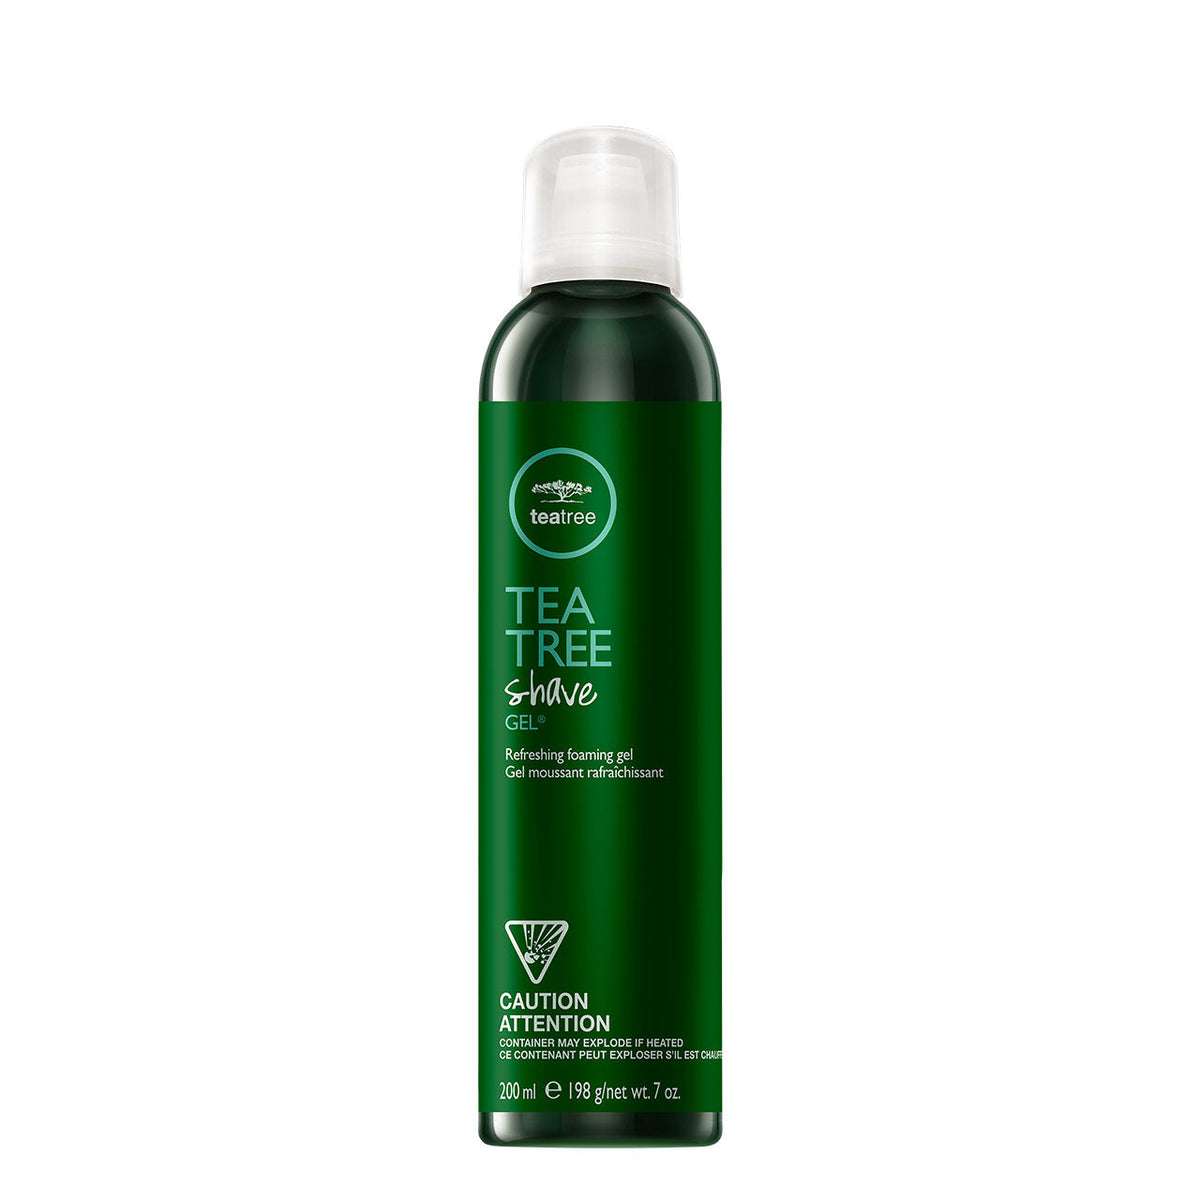 Tea Tree Shave Gel - by Paul Mitchell |ProCare Outlet|